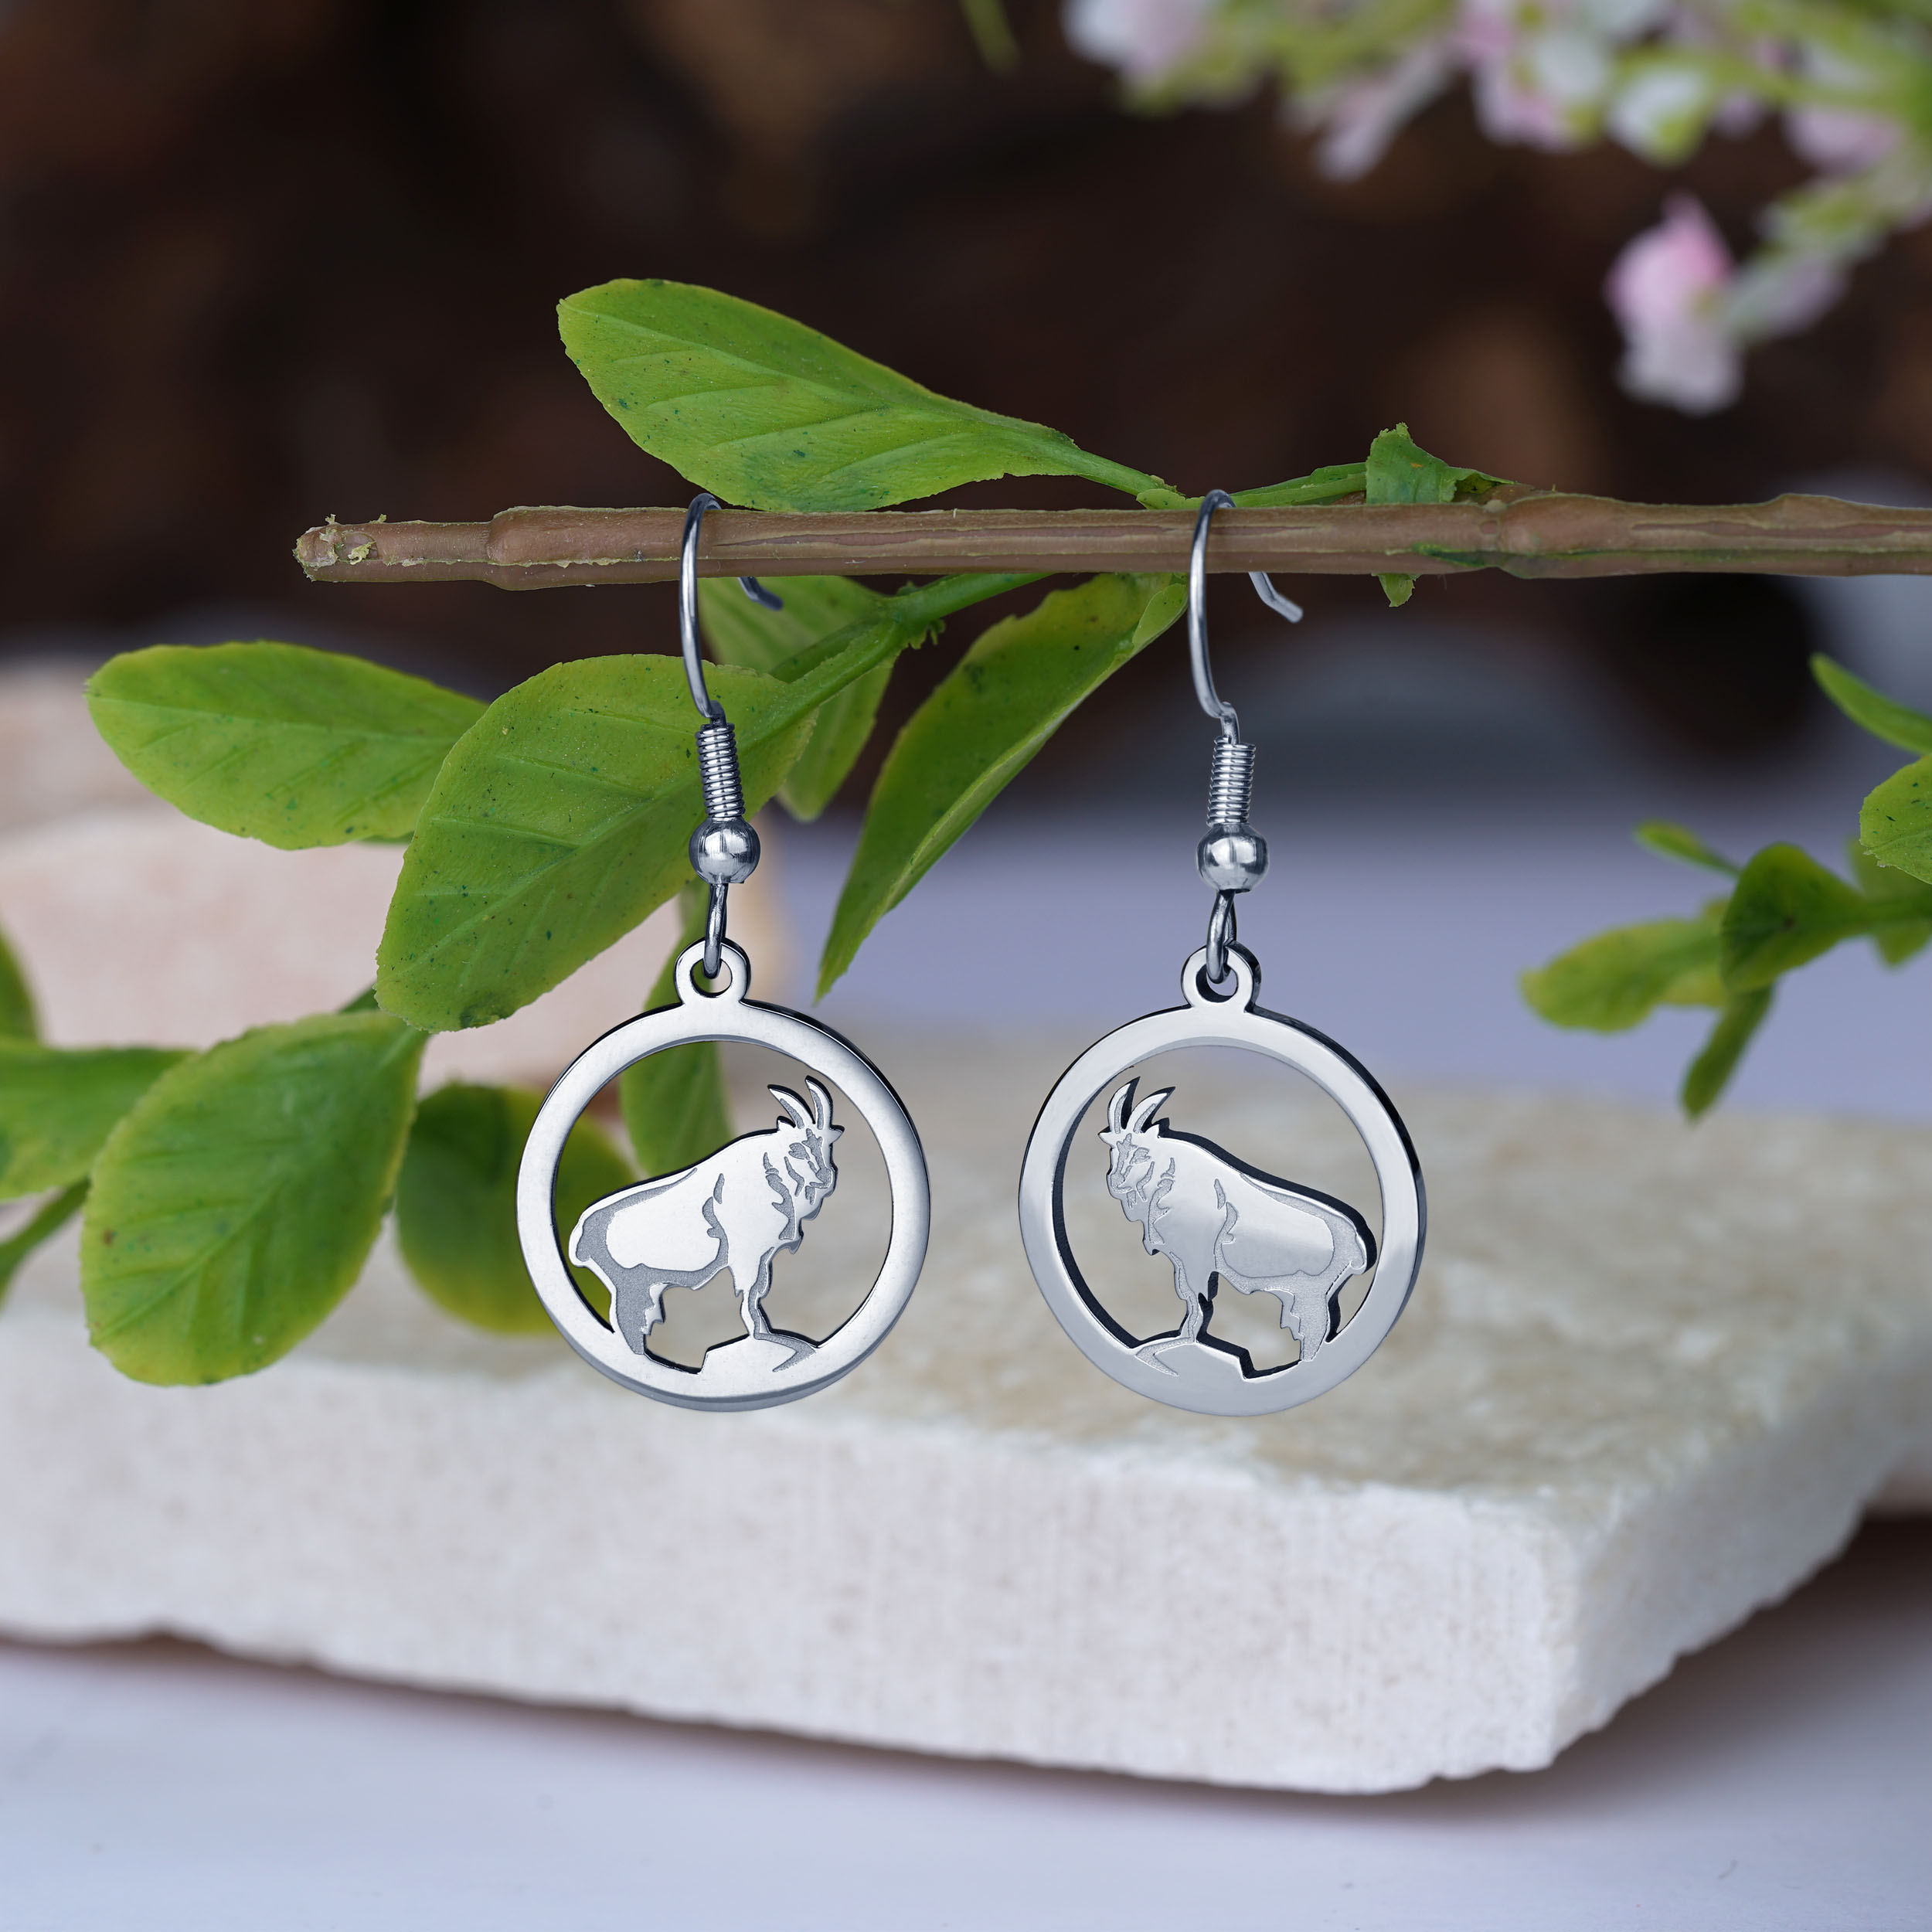 Animal Necklace With Wildlife Animal Cutout in a Circle Pendant.